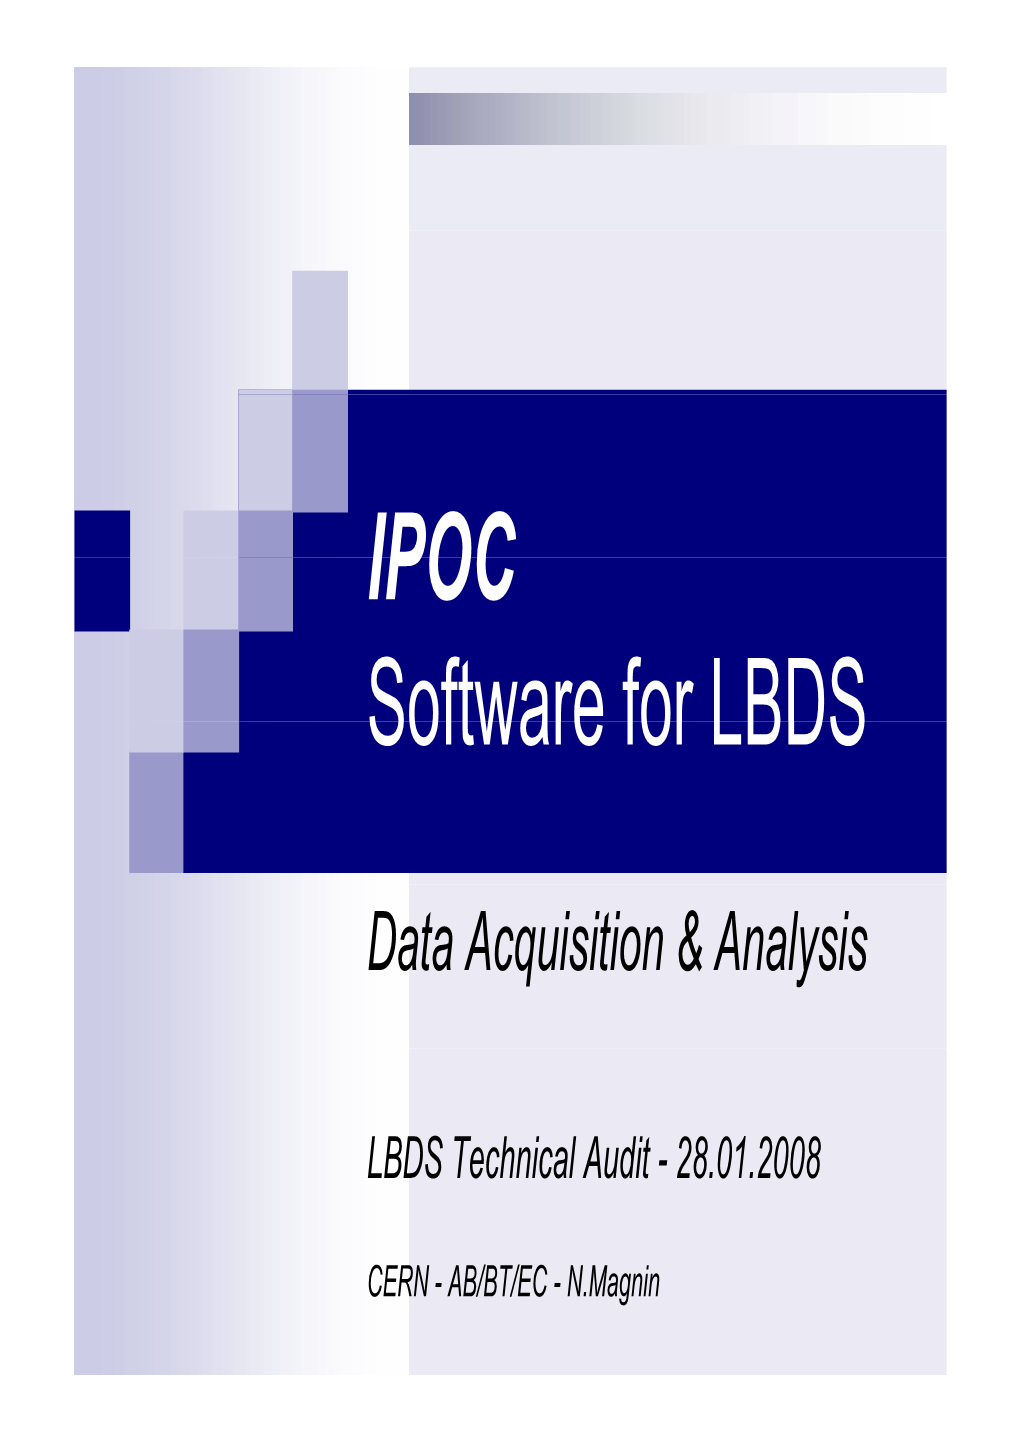 IPOC Software for LBDS